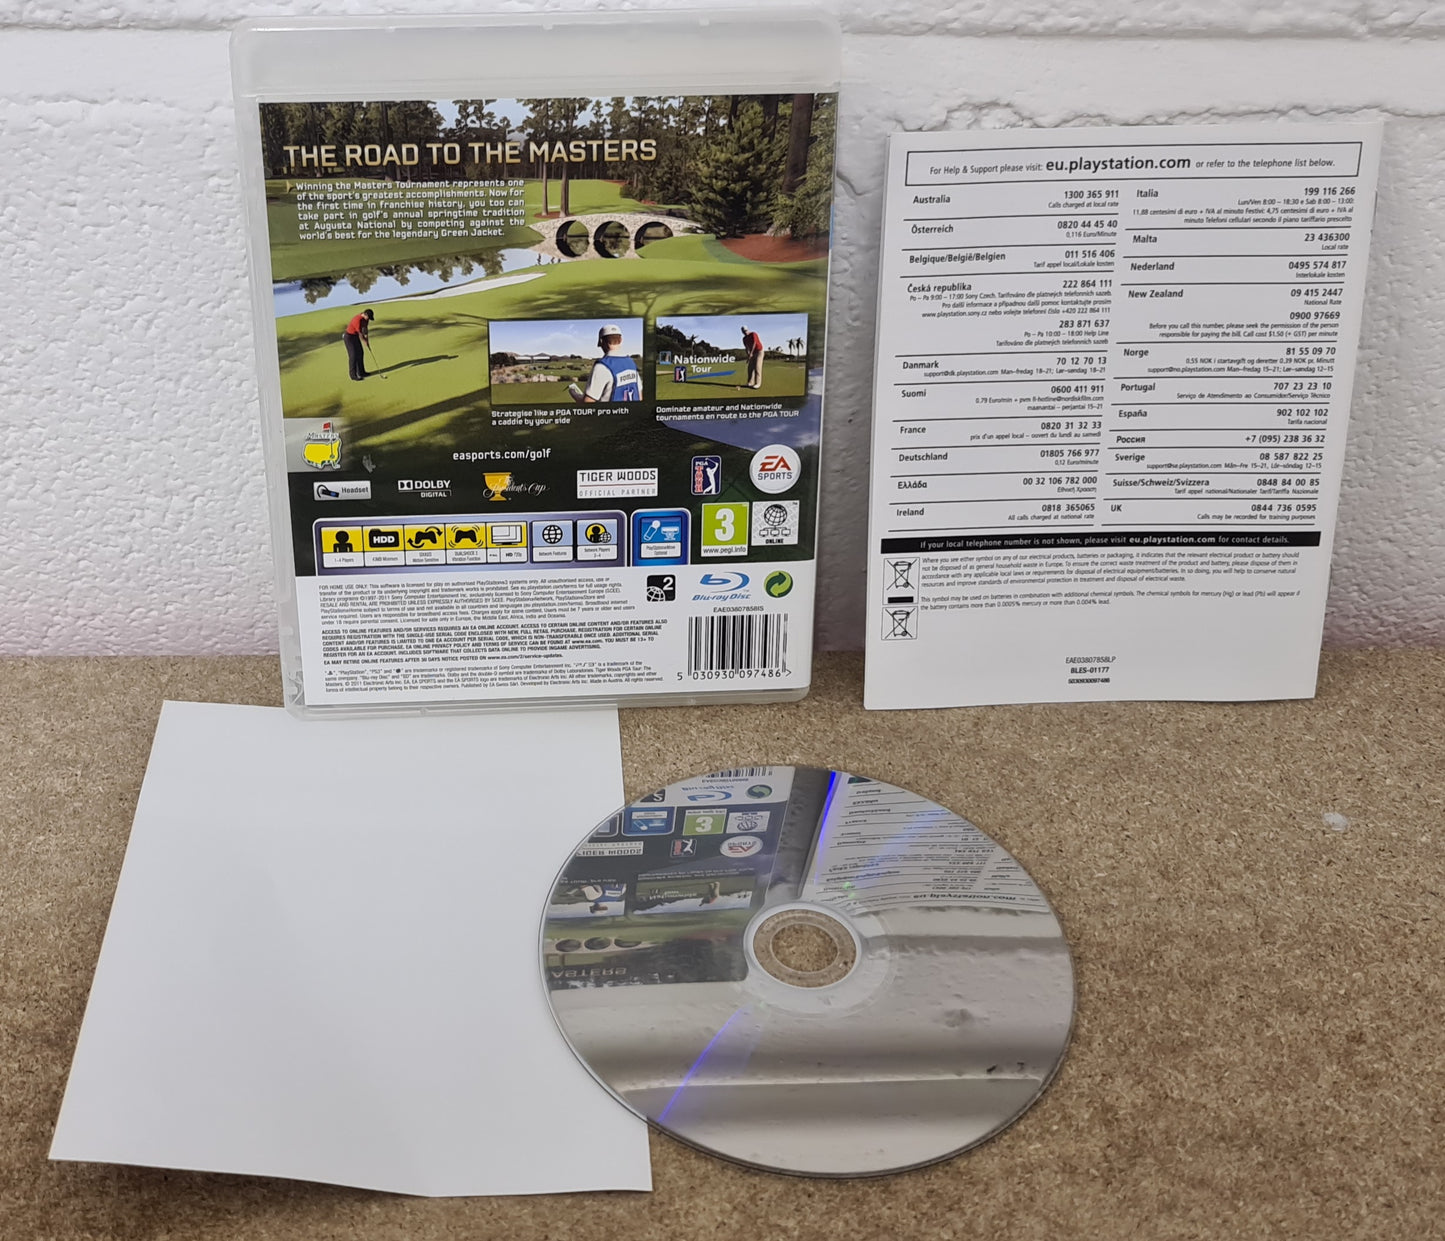 Masters Tiger Woods PGA Tour 12 Sony Playstation 3 (PS3) Game